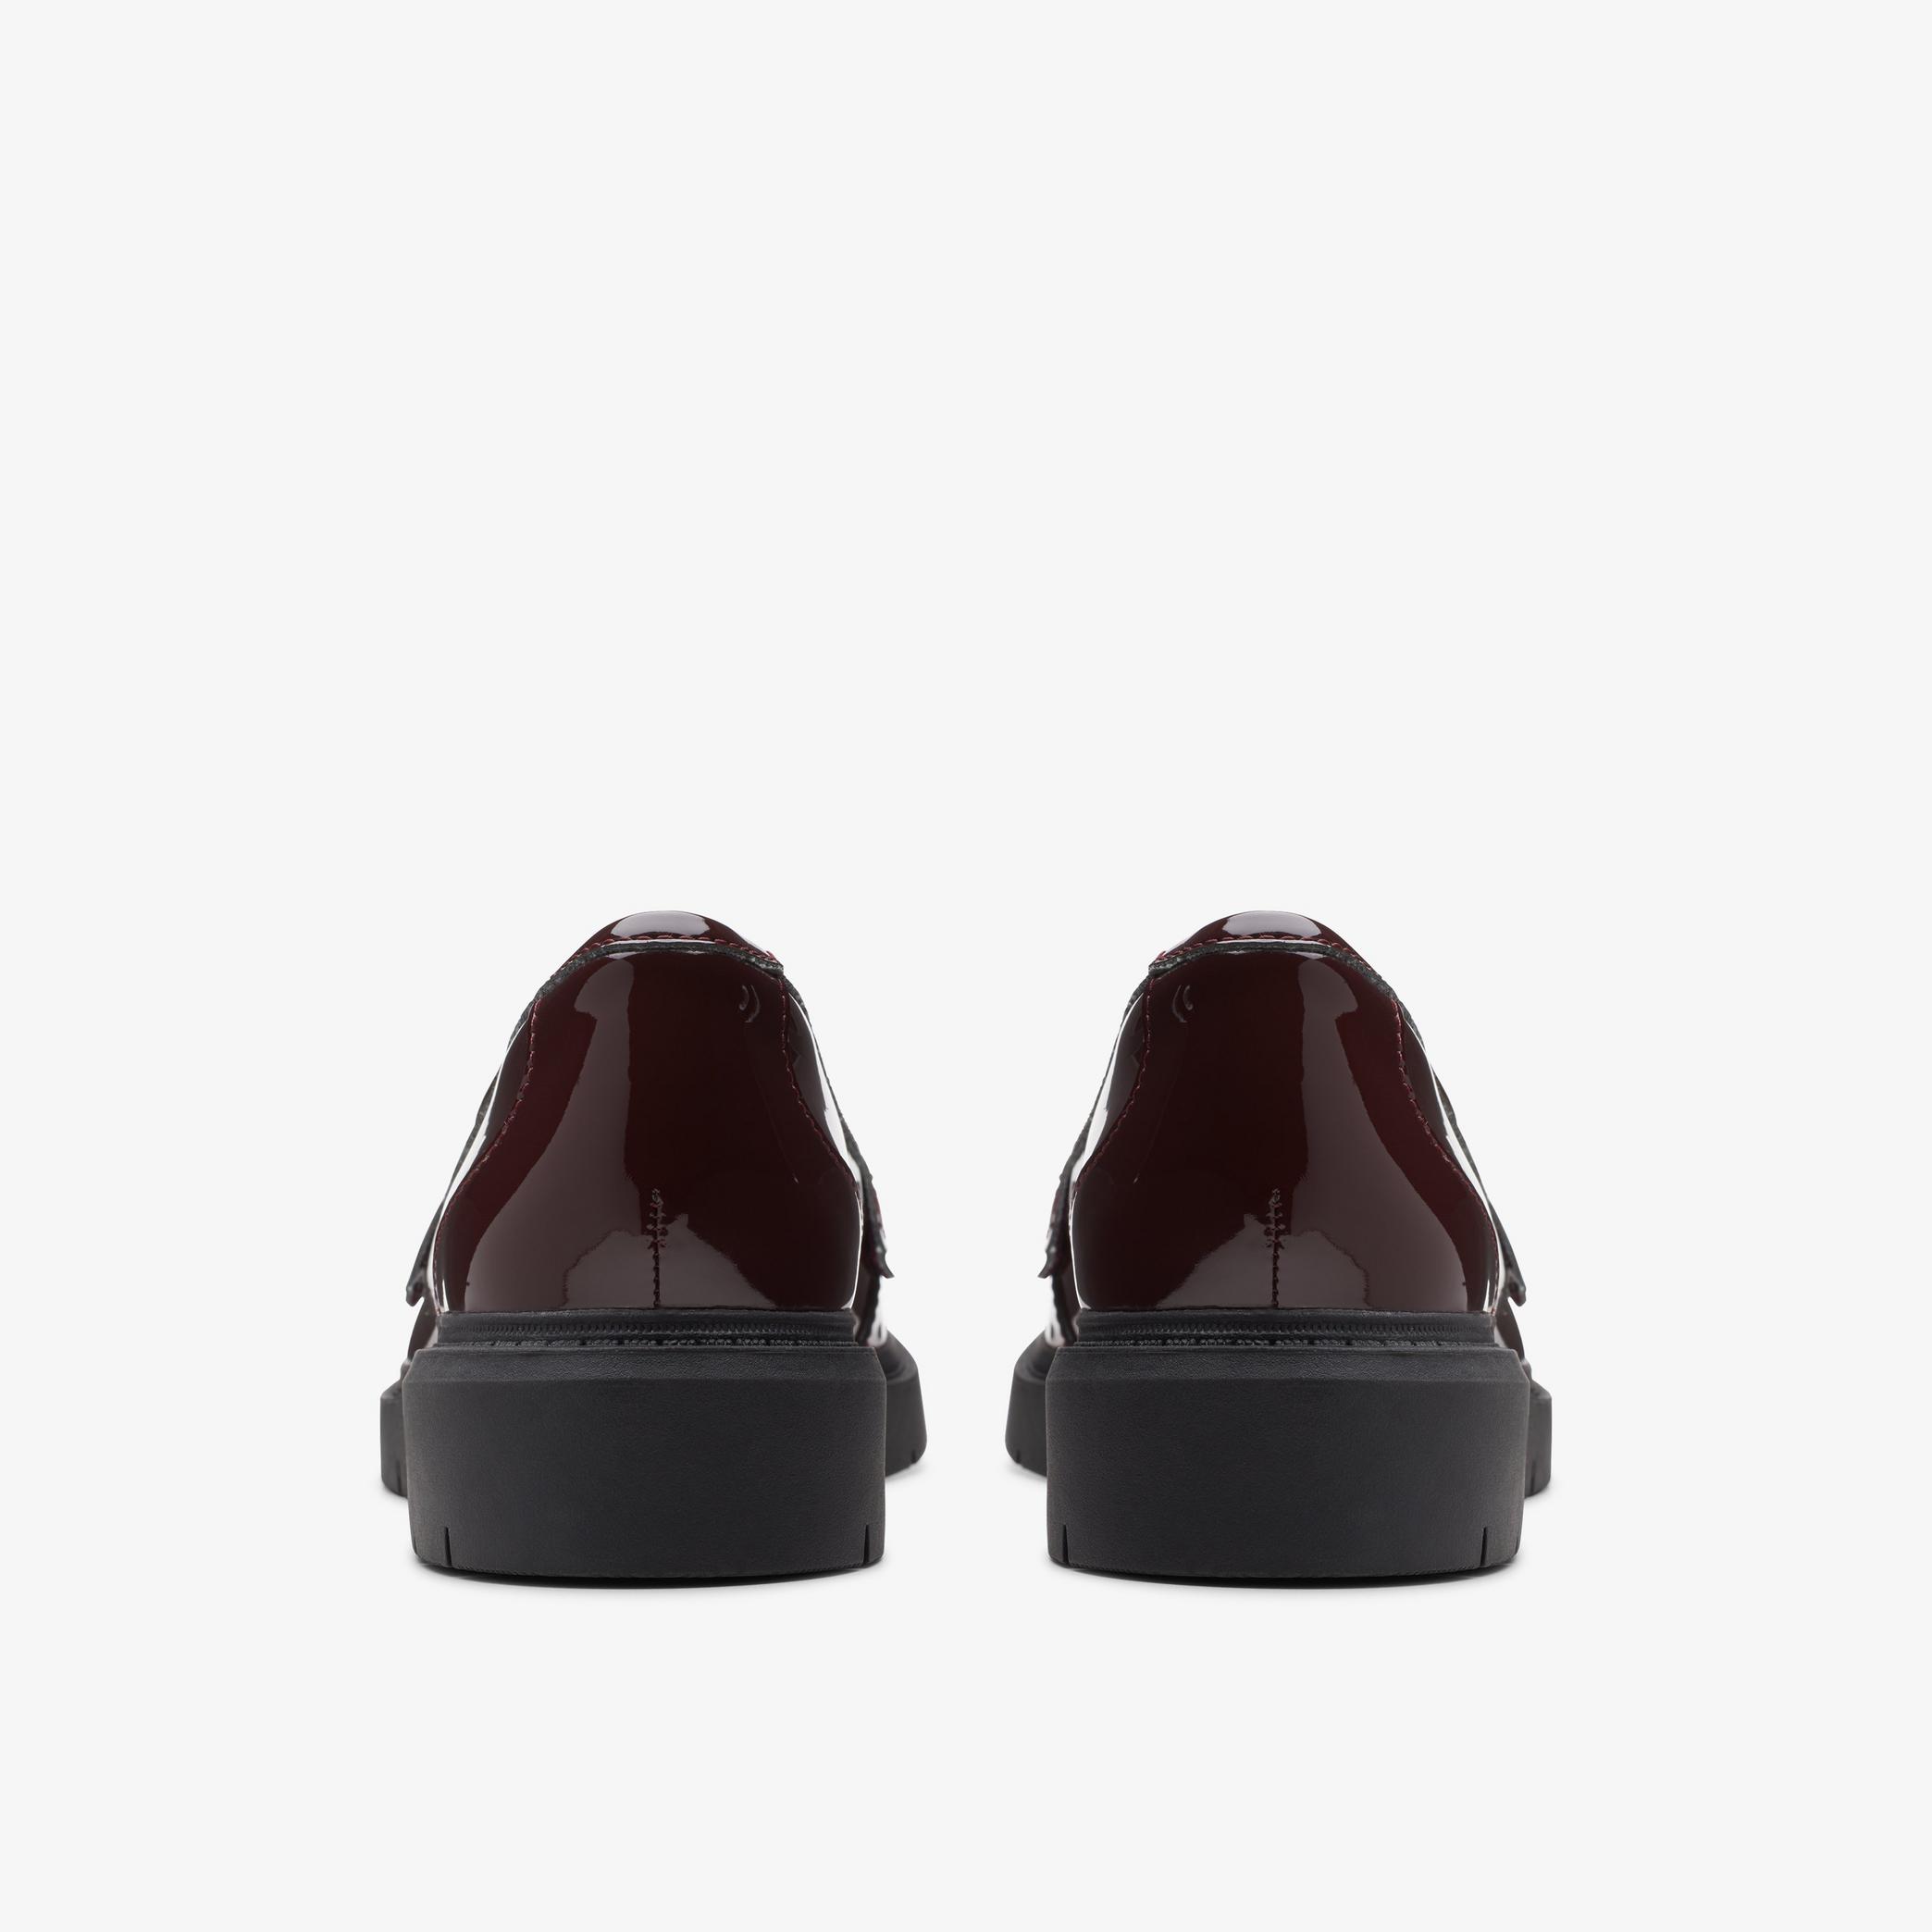 Westlynn Ayla Burgundy Patent Loafers, view 5 of 6